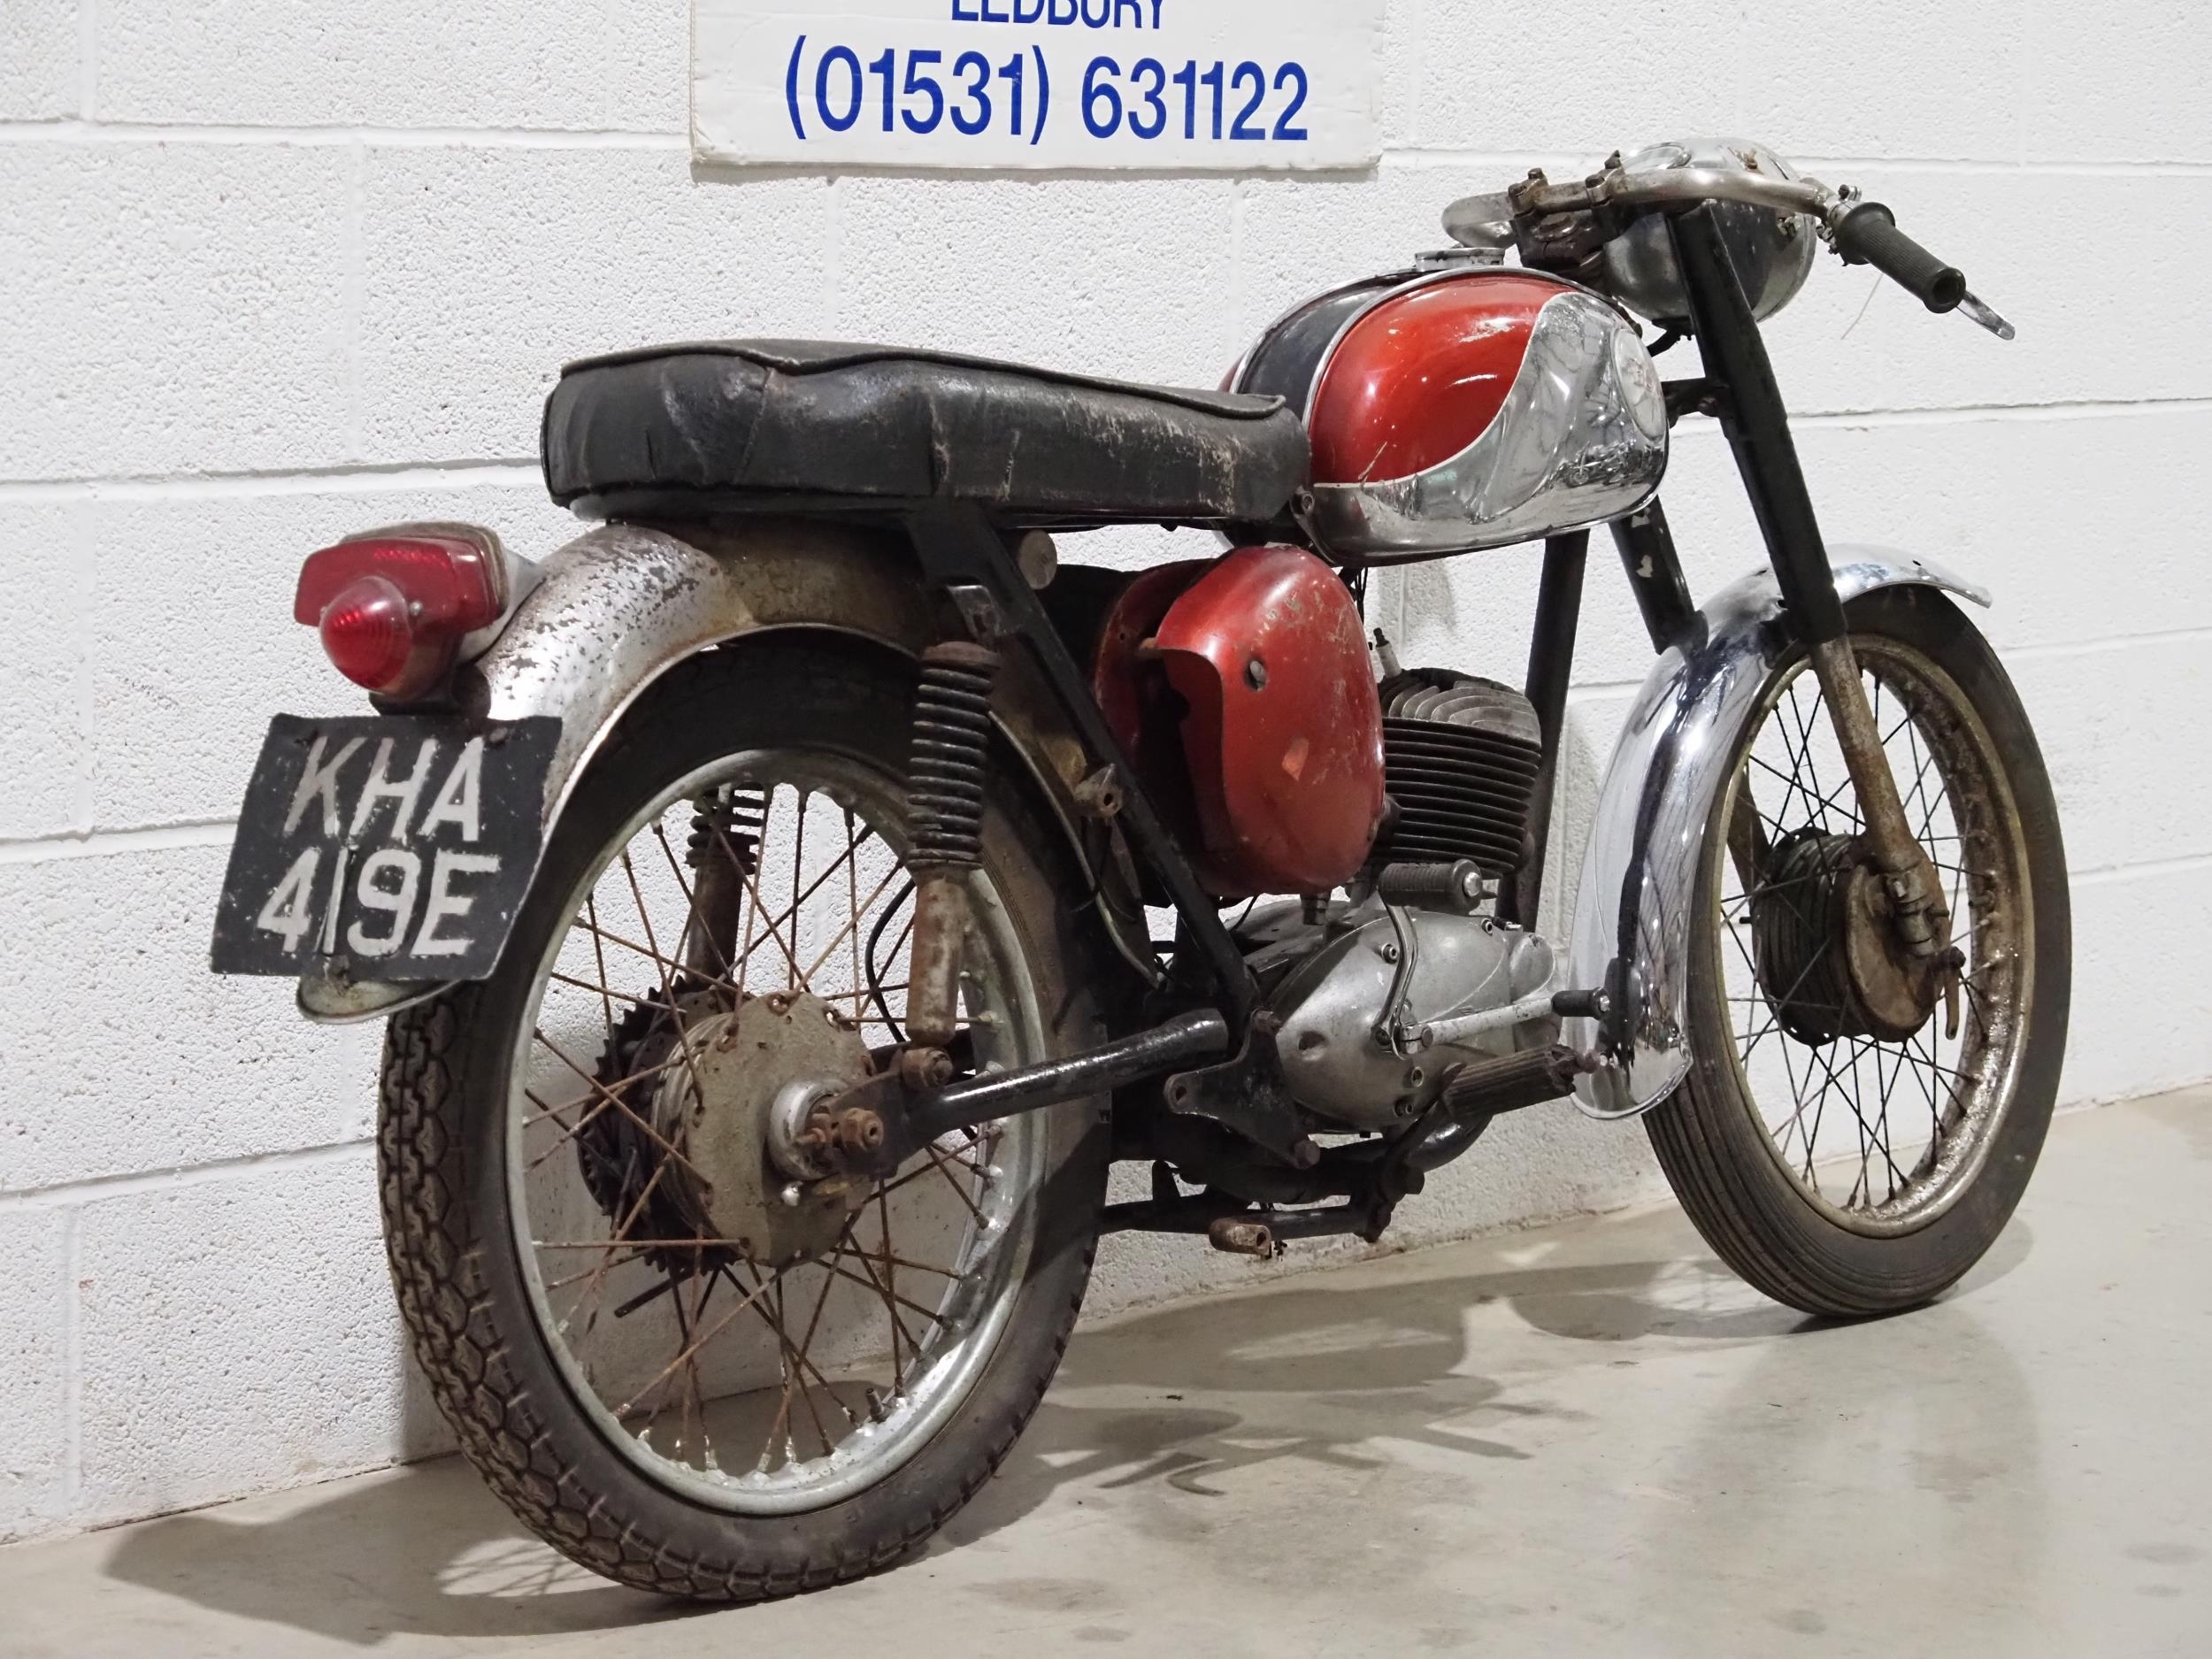 BSA Bantam D10 motorcycle project. 1967. 175cc. Engine turns over with compression. Reg. KHA 419E. - Image 3 of 6